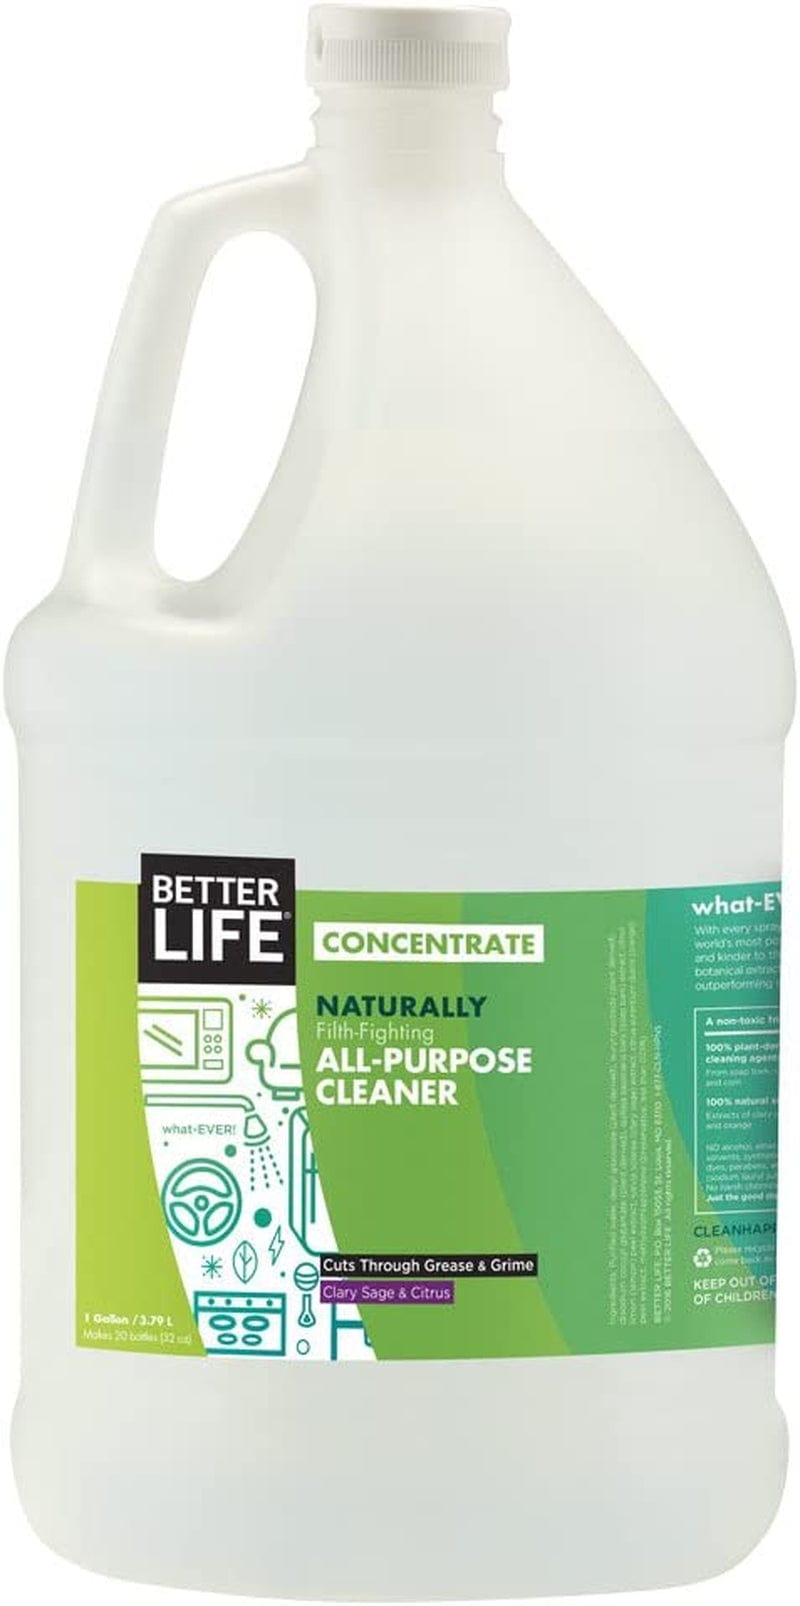 BETTER LIFE All Purpose Cleaner, Multipurpose Home and Kitchen Cleaning Spray for Glass, Countertops, Appliances, Upholstery & More, Multi-Surface Spray Cleaner - 32Oz (Pack of 2) Clary Sage & Citrus Home & Garden > Household Supplies > Household Cleaning Supplies Better Life Clary Sage & Citrus 128 Fl Oz (Pack of 1) 